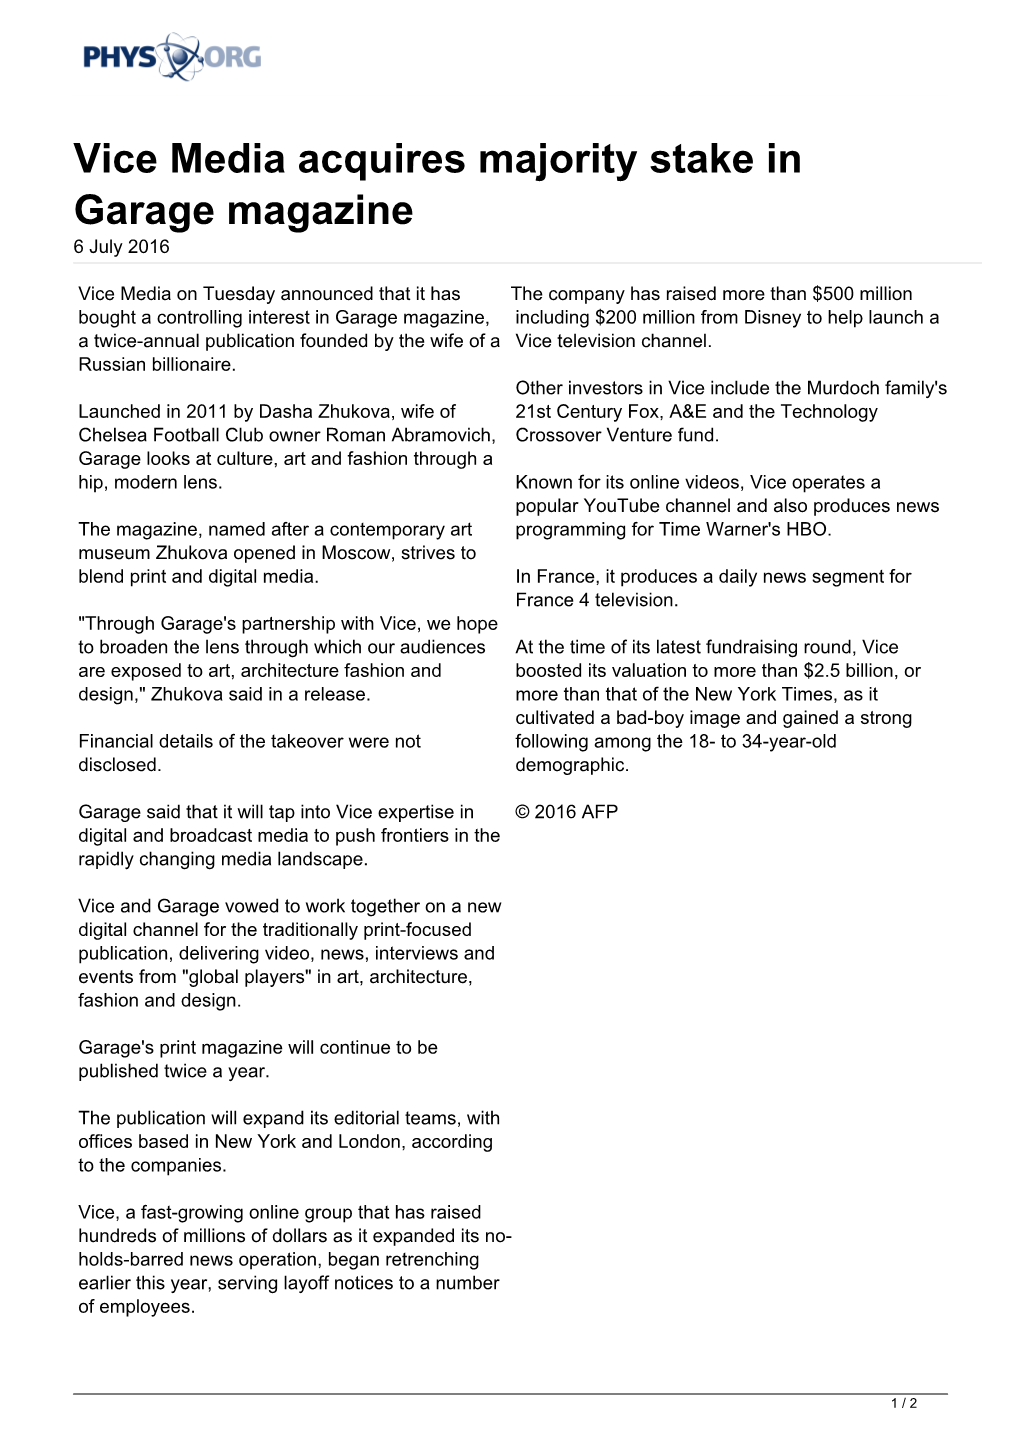 Vice Media Acquires Majority Stake in Garage Magazine 6 July 2016